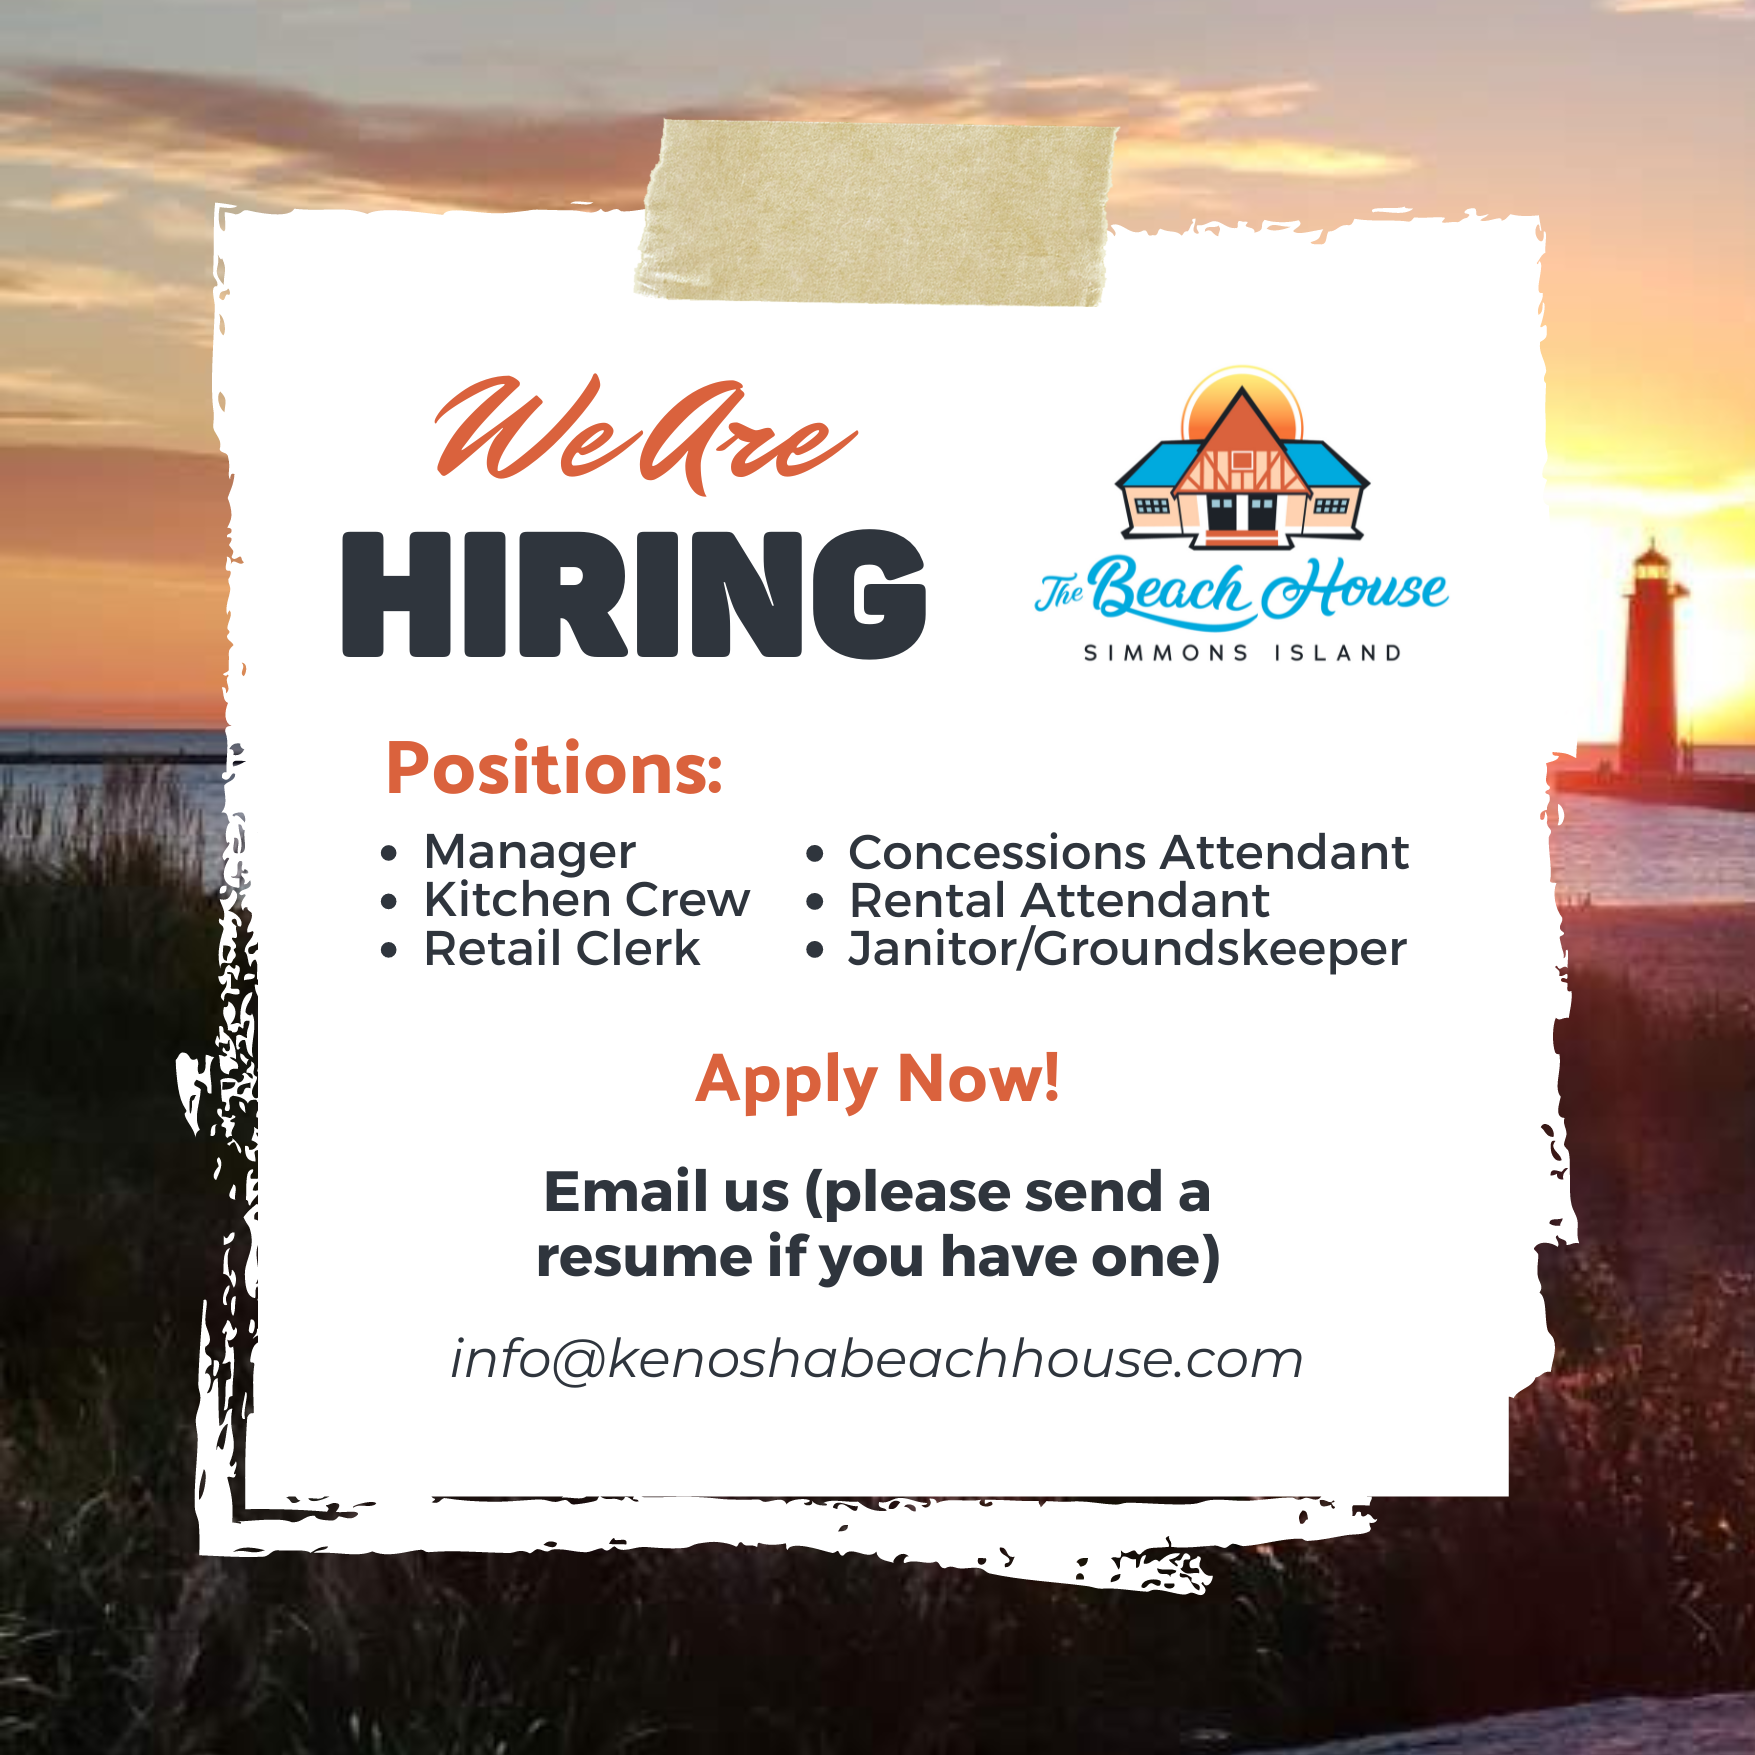 We are hiring Managers, Kitchen Crew, Retail Clerks, Concessions Attendants, Rental Attendant, and Janitor/Groundskeepers at the Beach House. Apply now by emailing us with a resume if you have one at info@kenoshabeachhouse.com